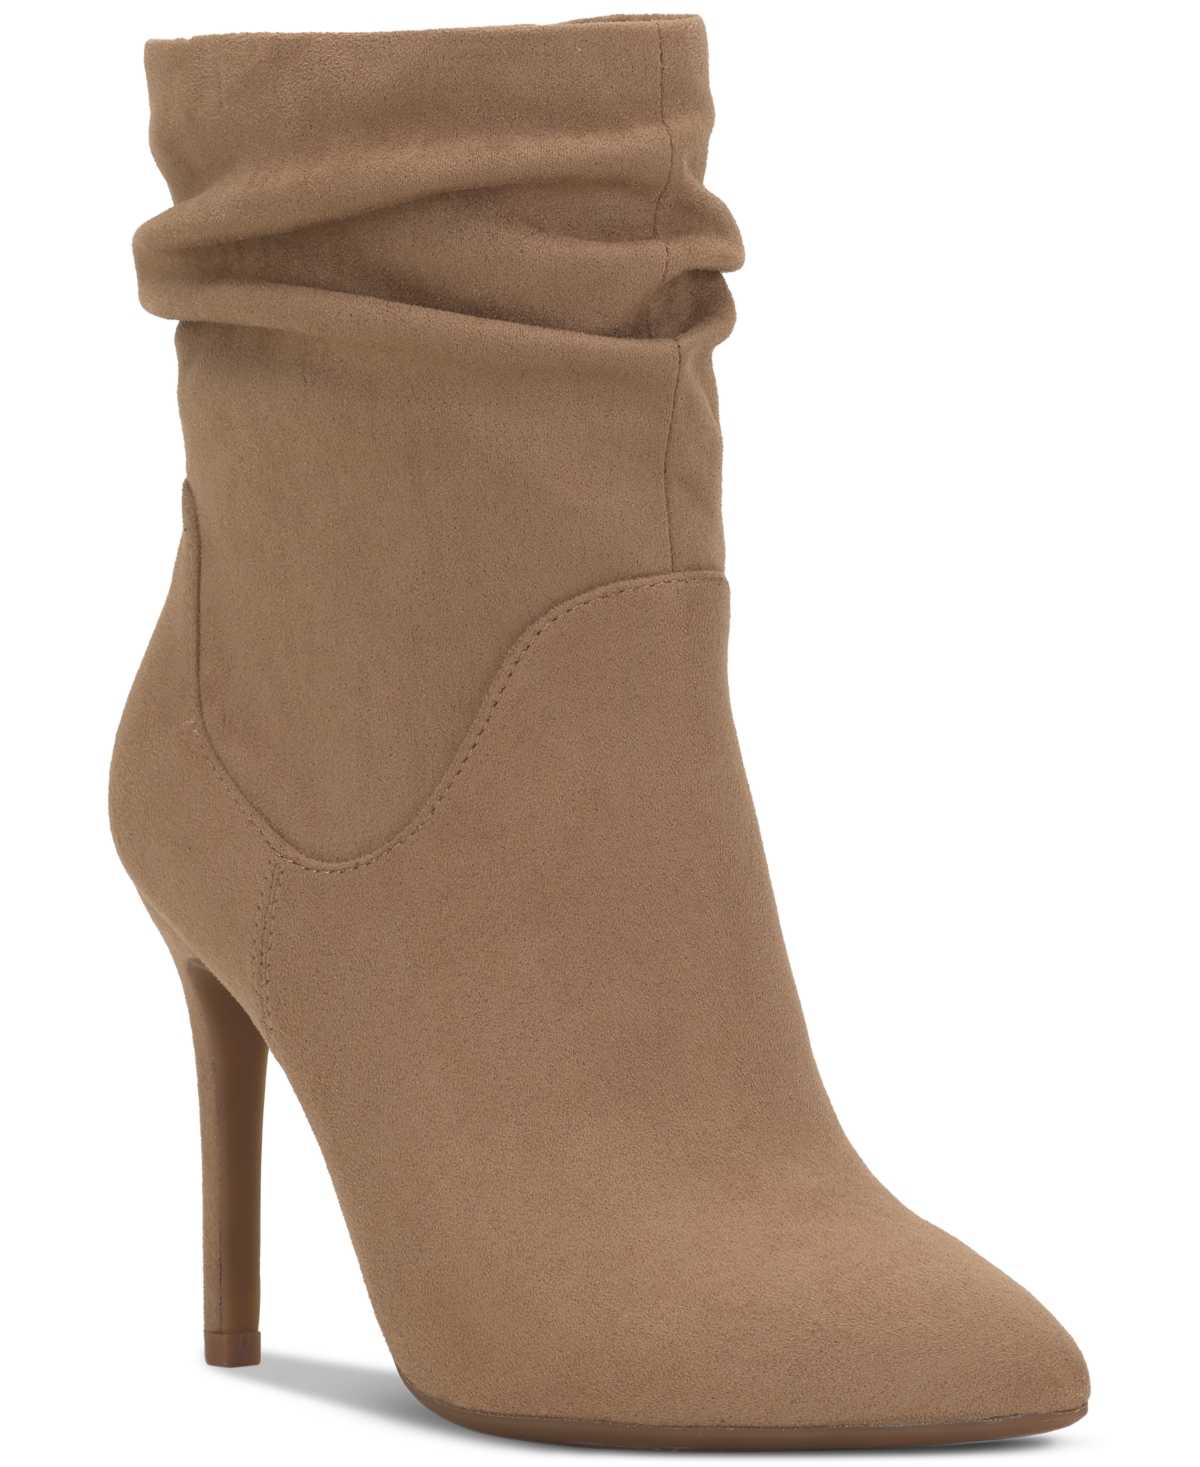 JESSICA SIMPSON WOMEN'S HARTZELL POINTED-TOE SLOUCH BOOTIES